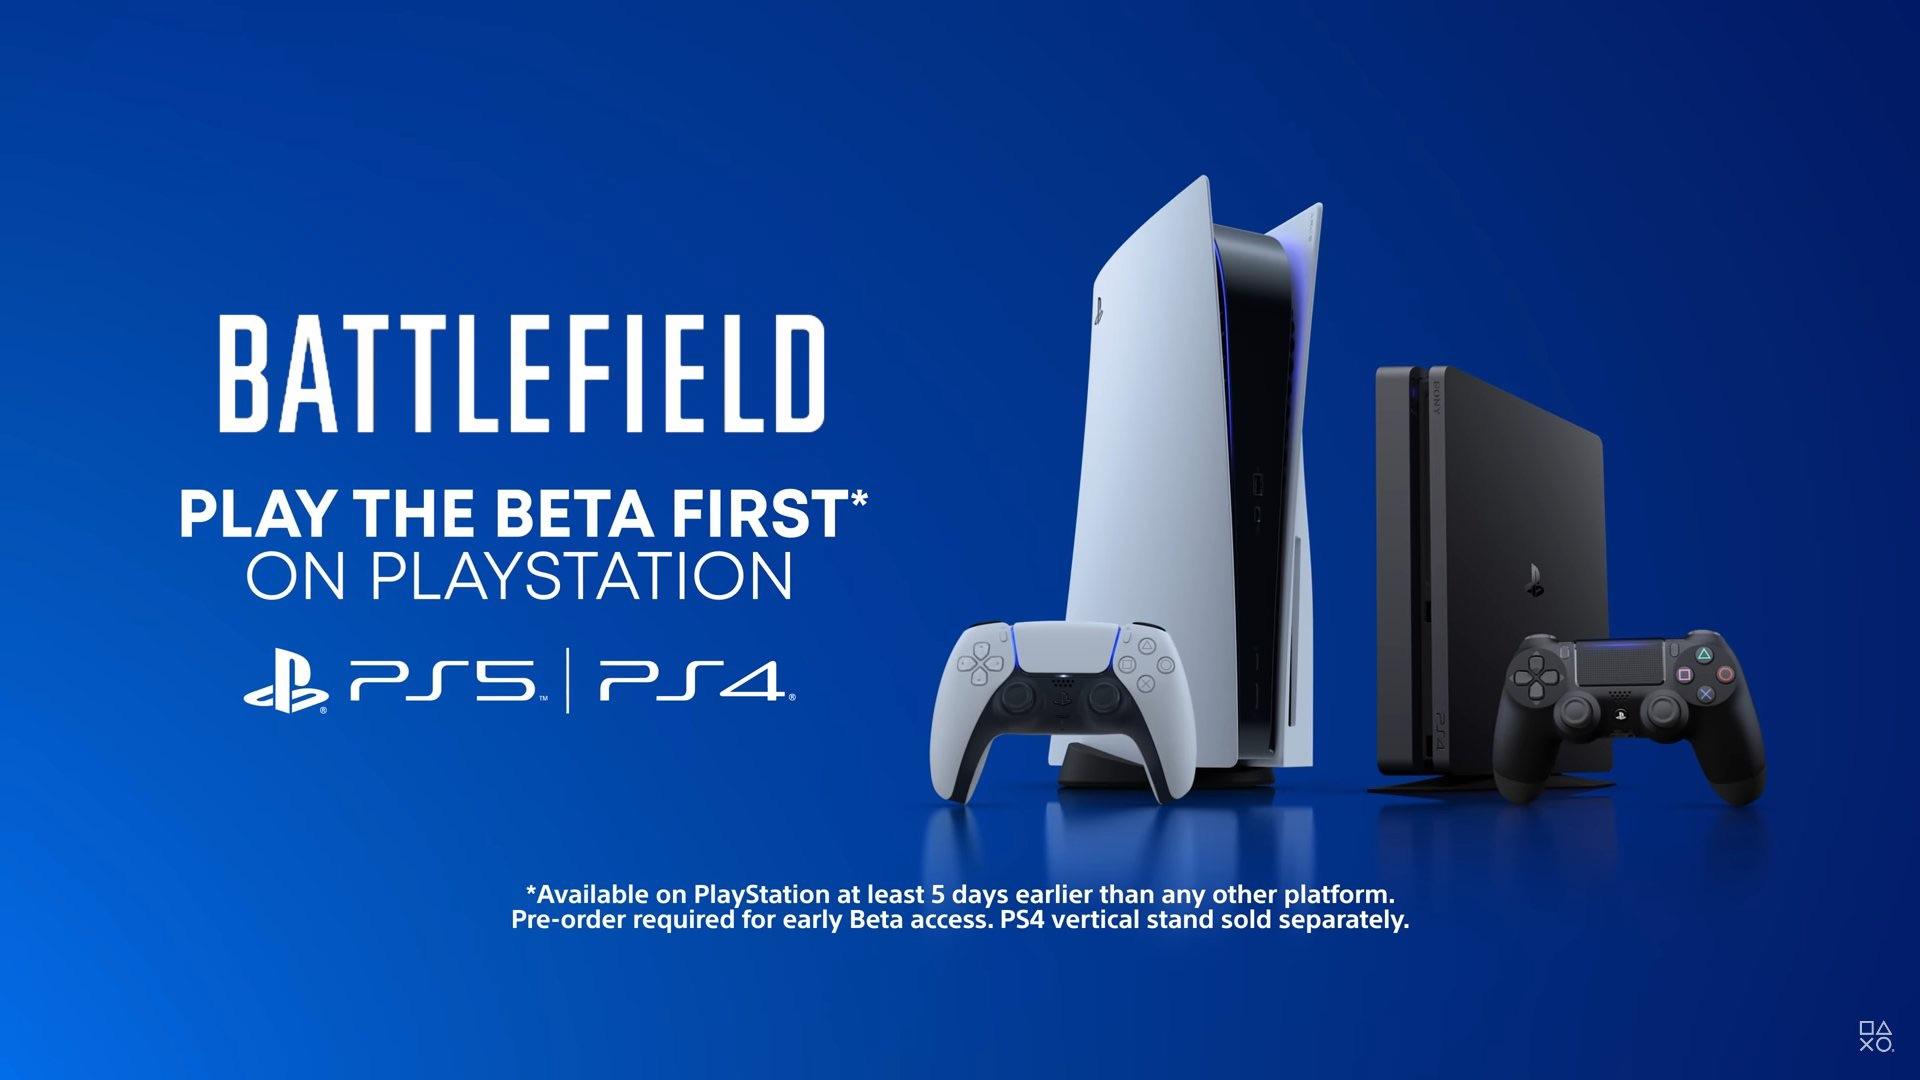 What If Battlefield Got Marketing Rights With Playstation